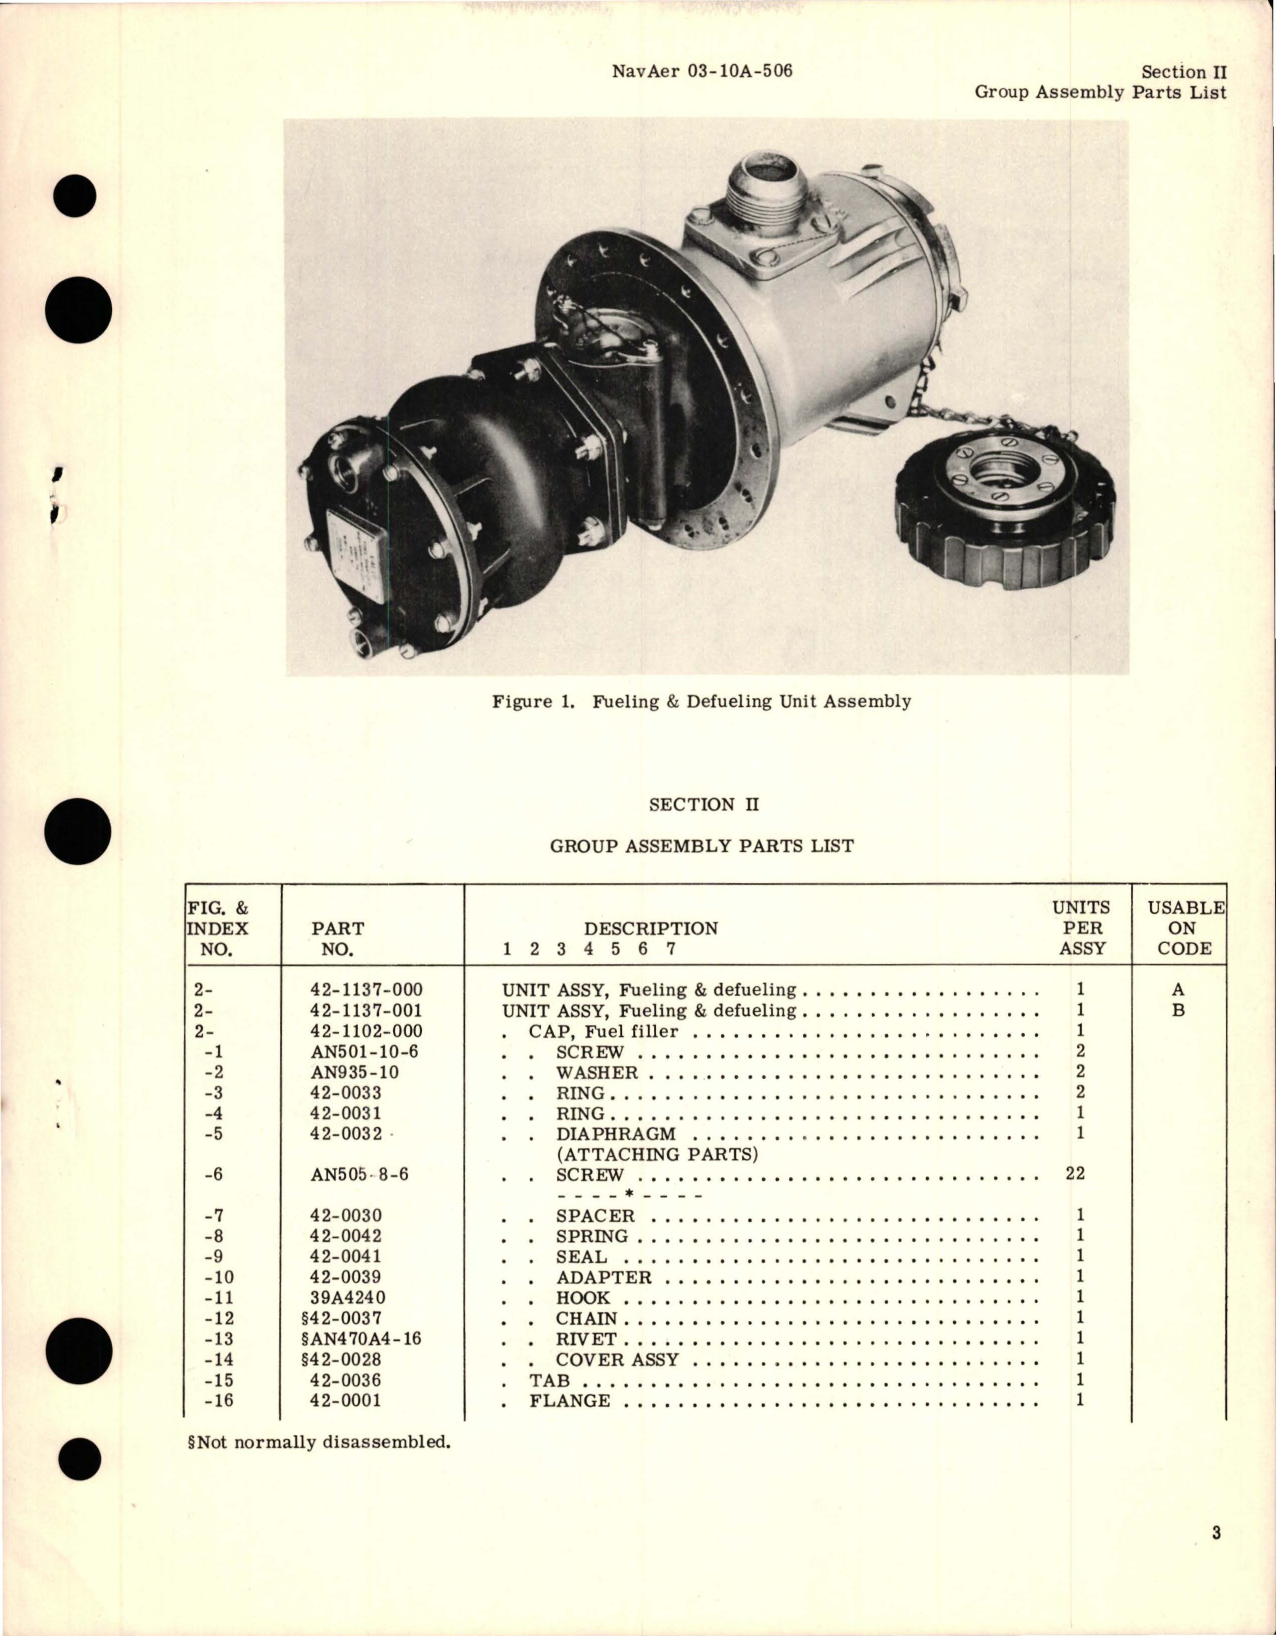 Sample page 5 from AirCorps Library document: Illustrated Parts Breakdown for Fueling and Defueling Unit Assembly - Parts 42-1137-000 and 42-1137-001